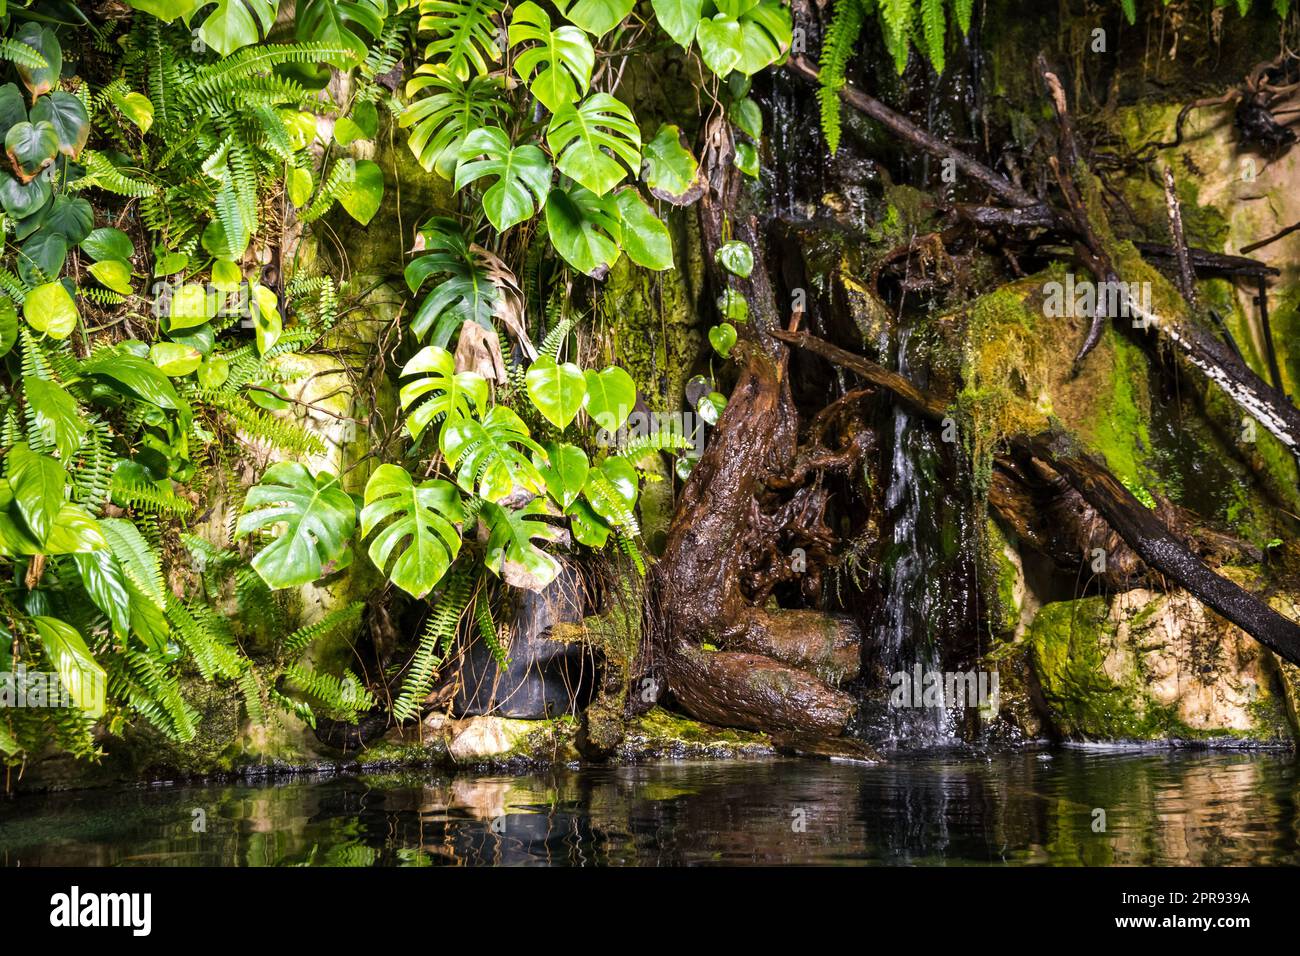 tropical pond in a rainforest mangrove Stock Photo